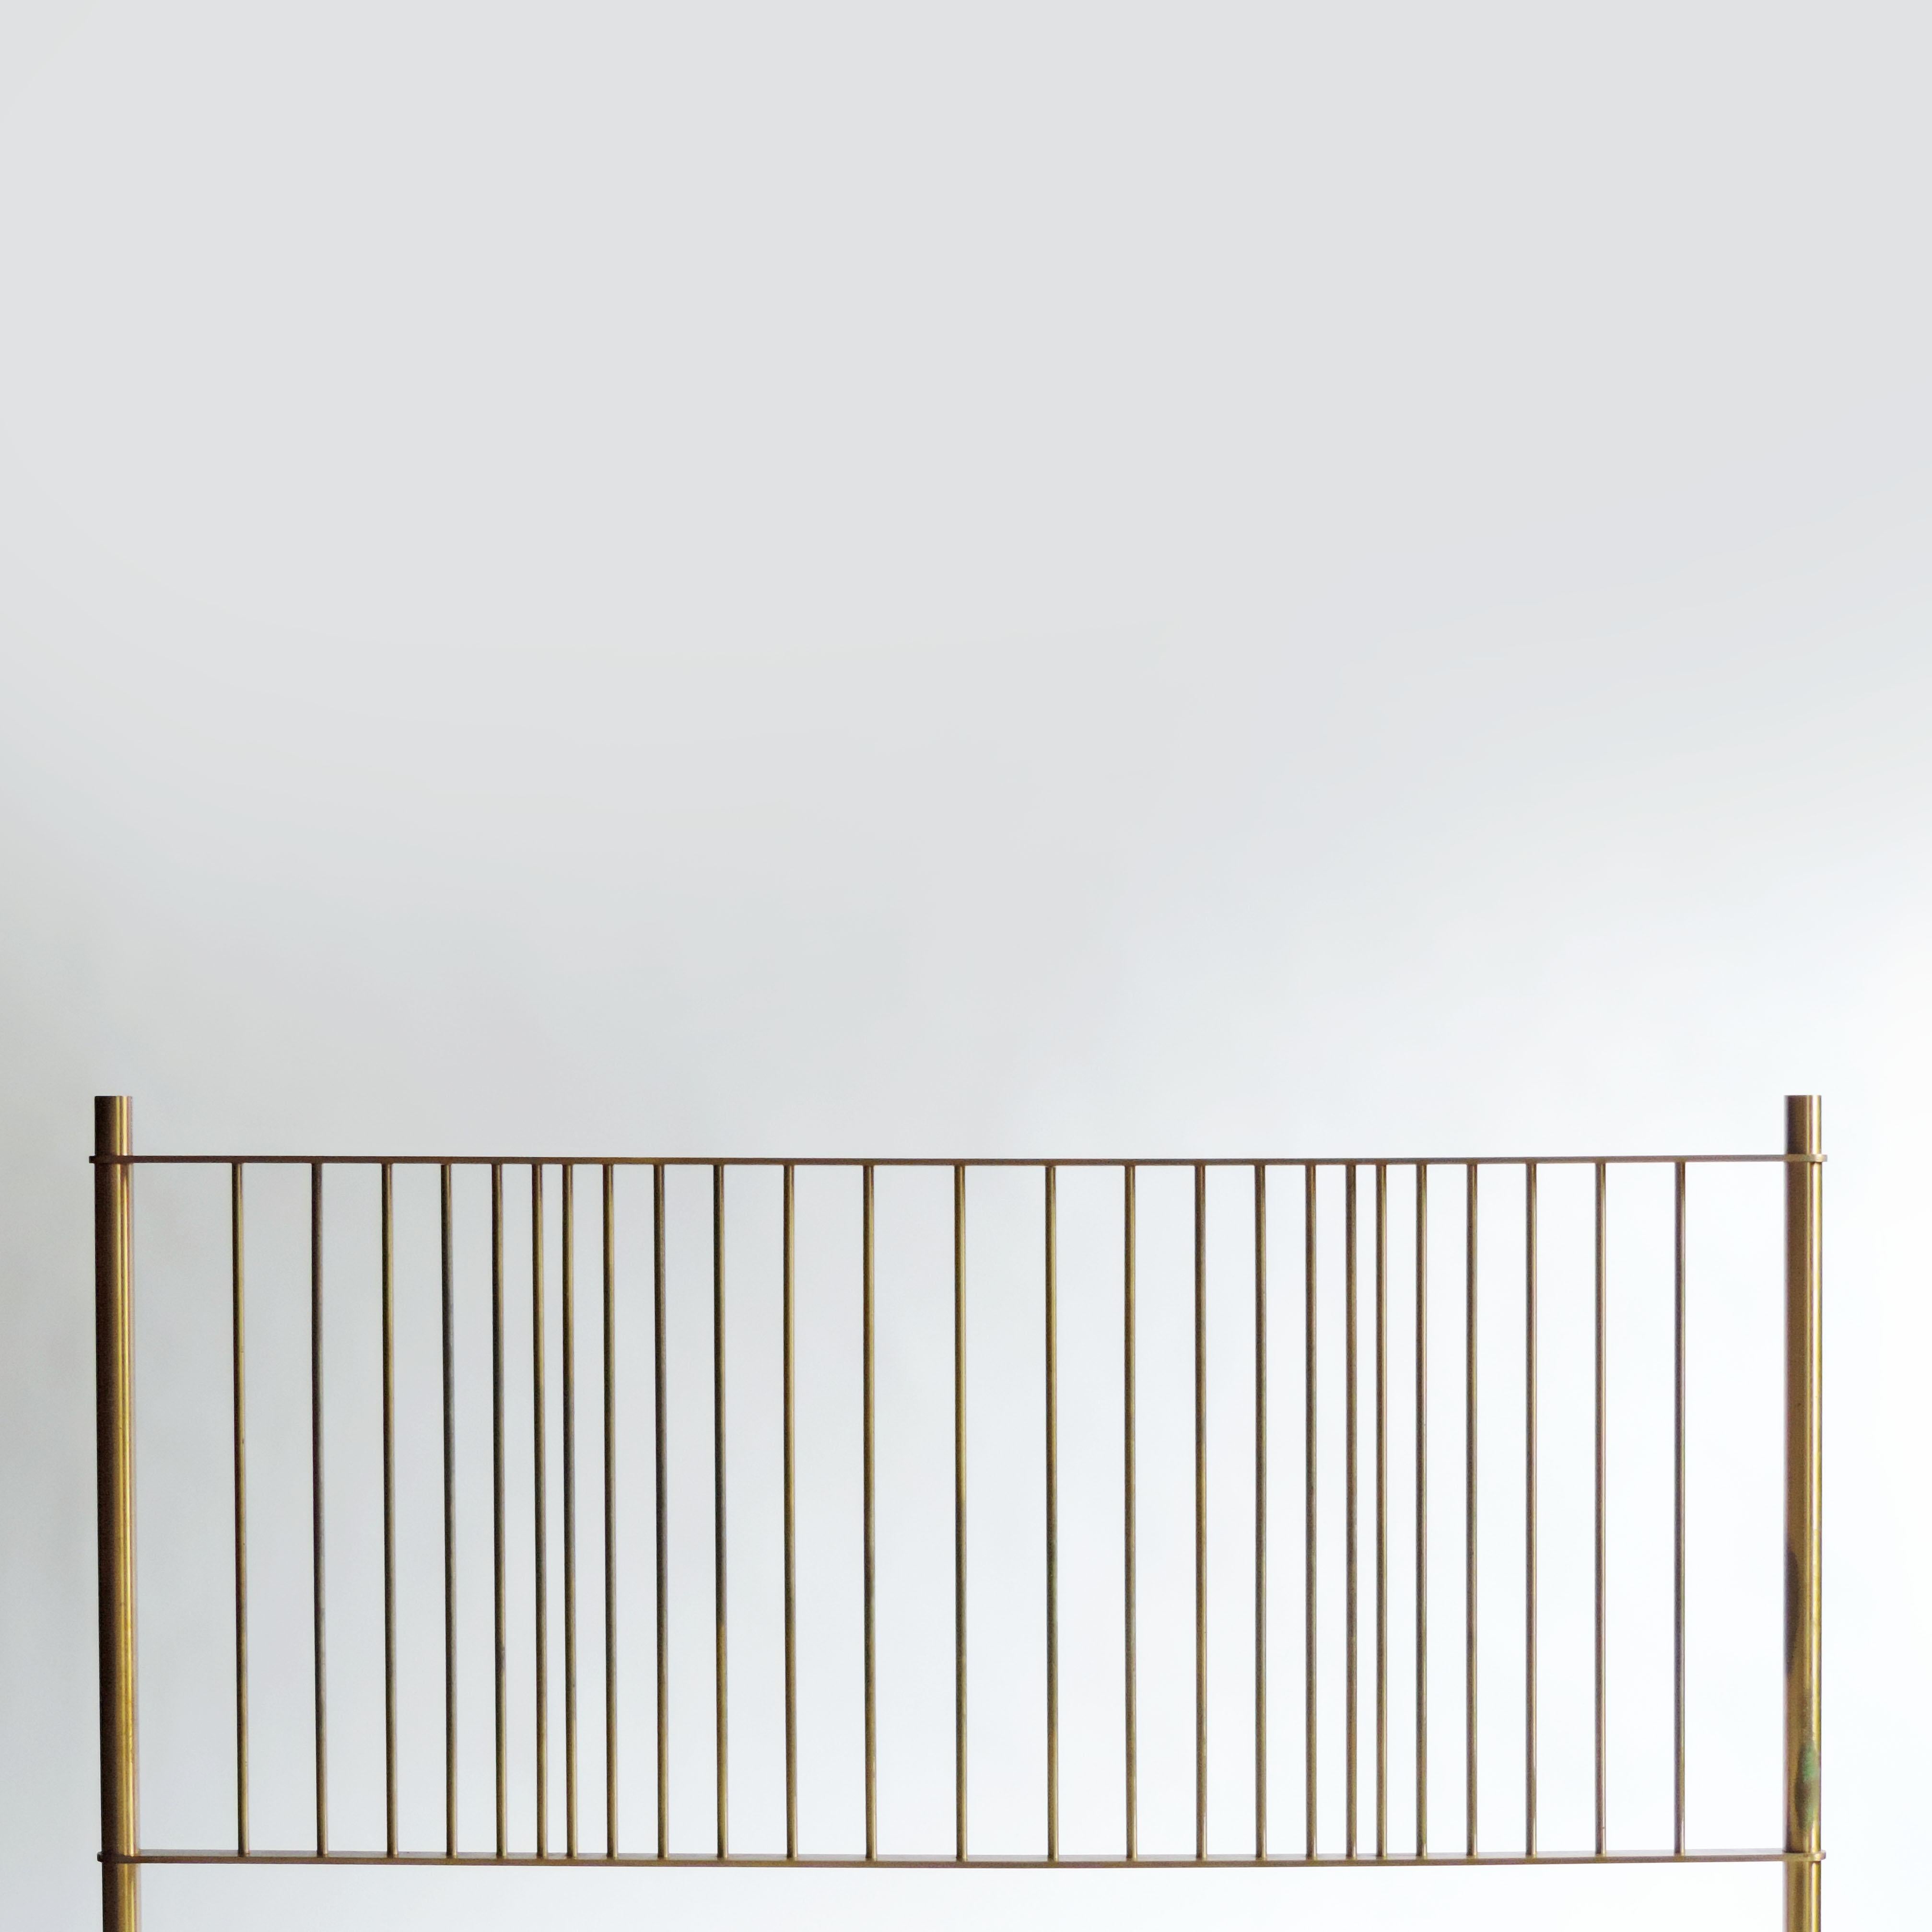 Rare Italian architects Franco Albini & Franca Helg 'Mirage' optical effect brass double bed for Frigerio, Italy, 1970s
Reference: Domus 08 / 1974
Inner bed size: W 168.5, D 196.5 Centimeter.